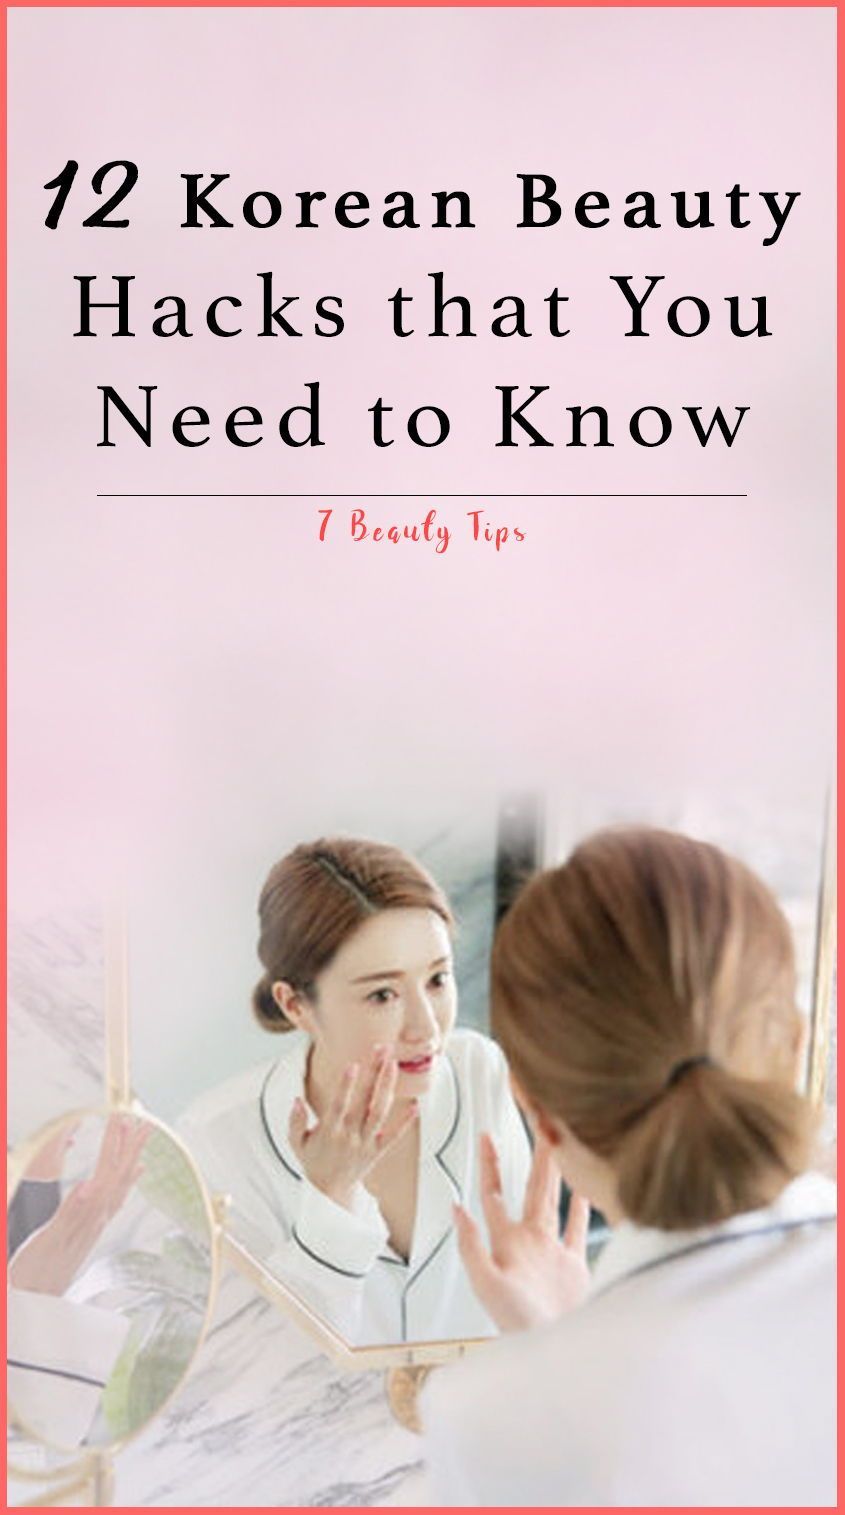 12 Korean Beauty Hacks that You Need to Know - 7BeautyTips - 12 Korean Beauty Hacks that You Need to Know - 7BeautyTips -   15 korean beauty Routines ideas